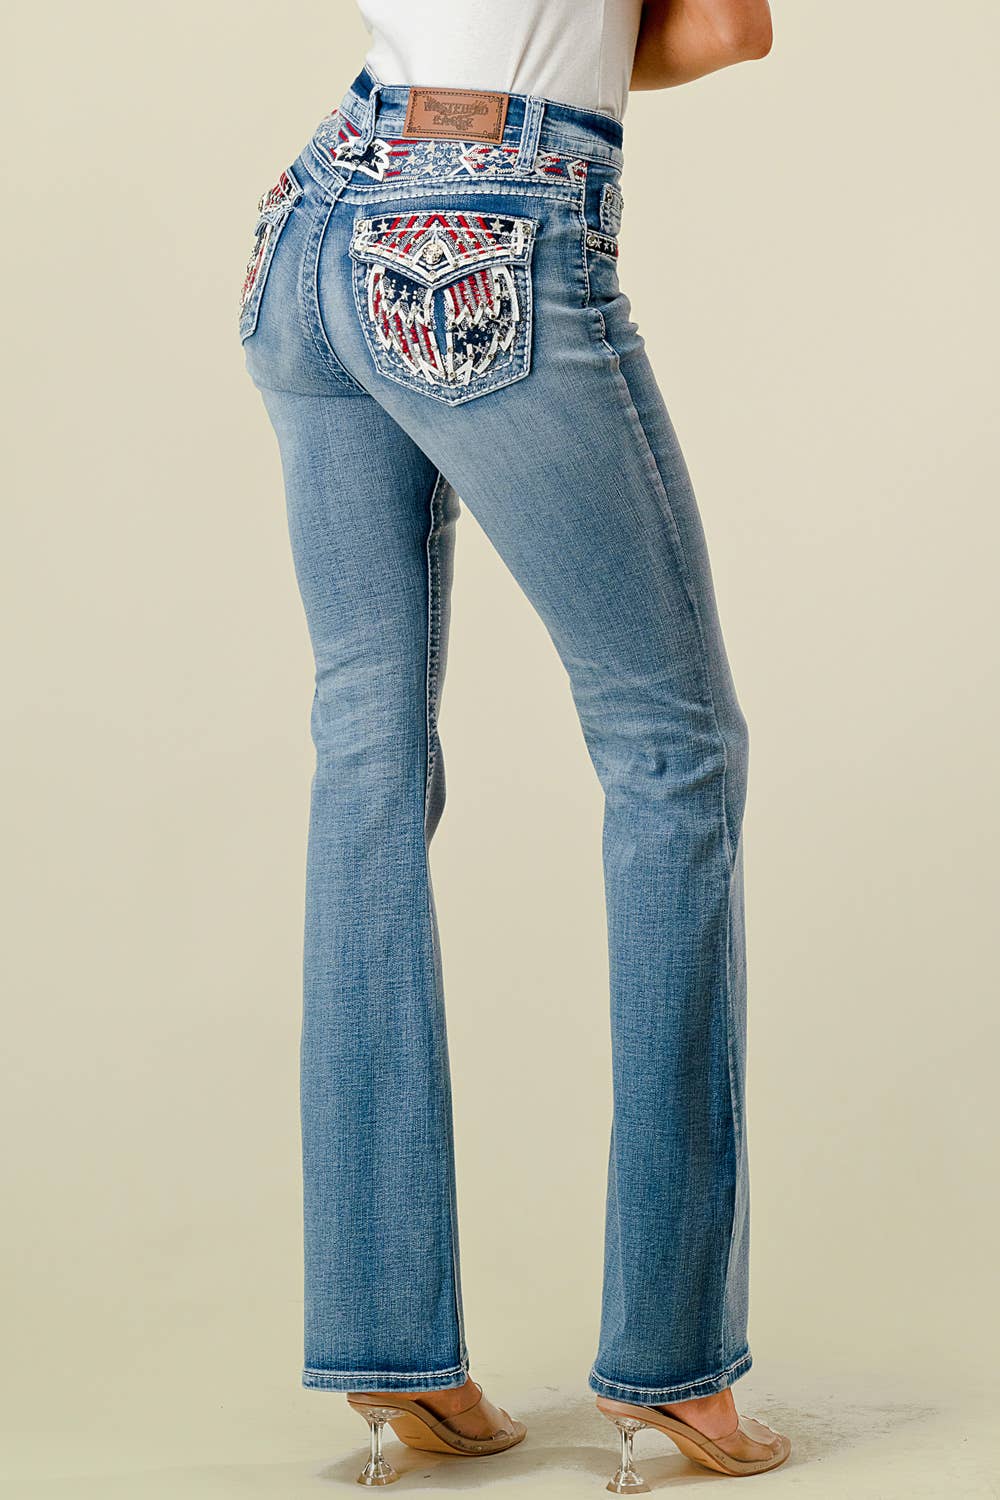 Women's Western Jeans With A Patriotic Flair